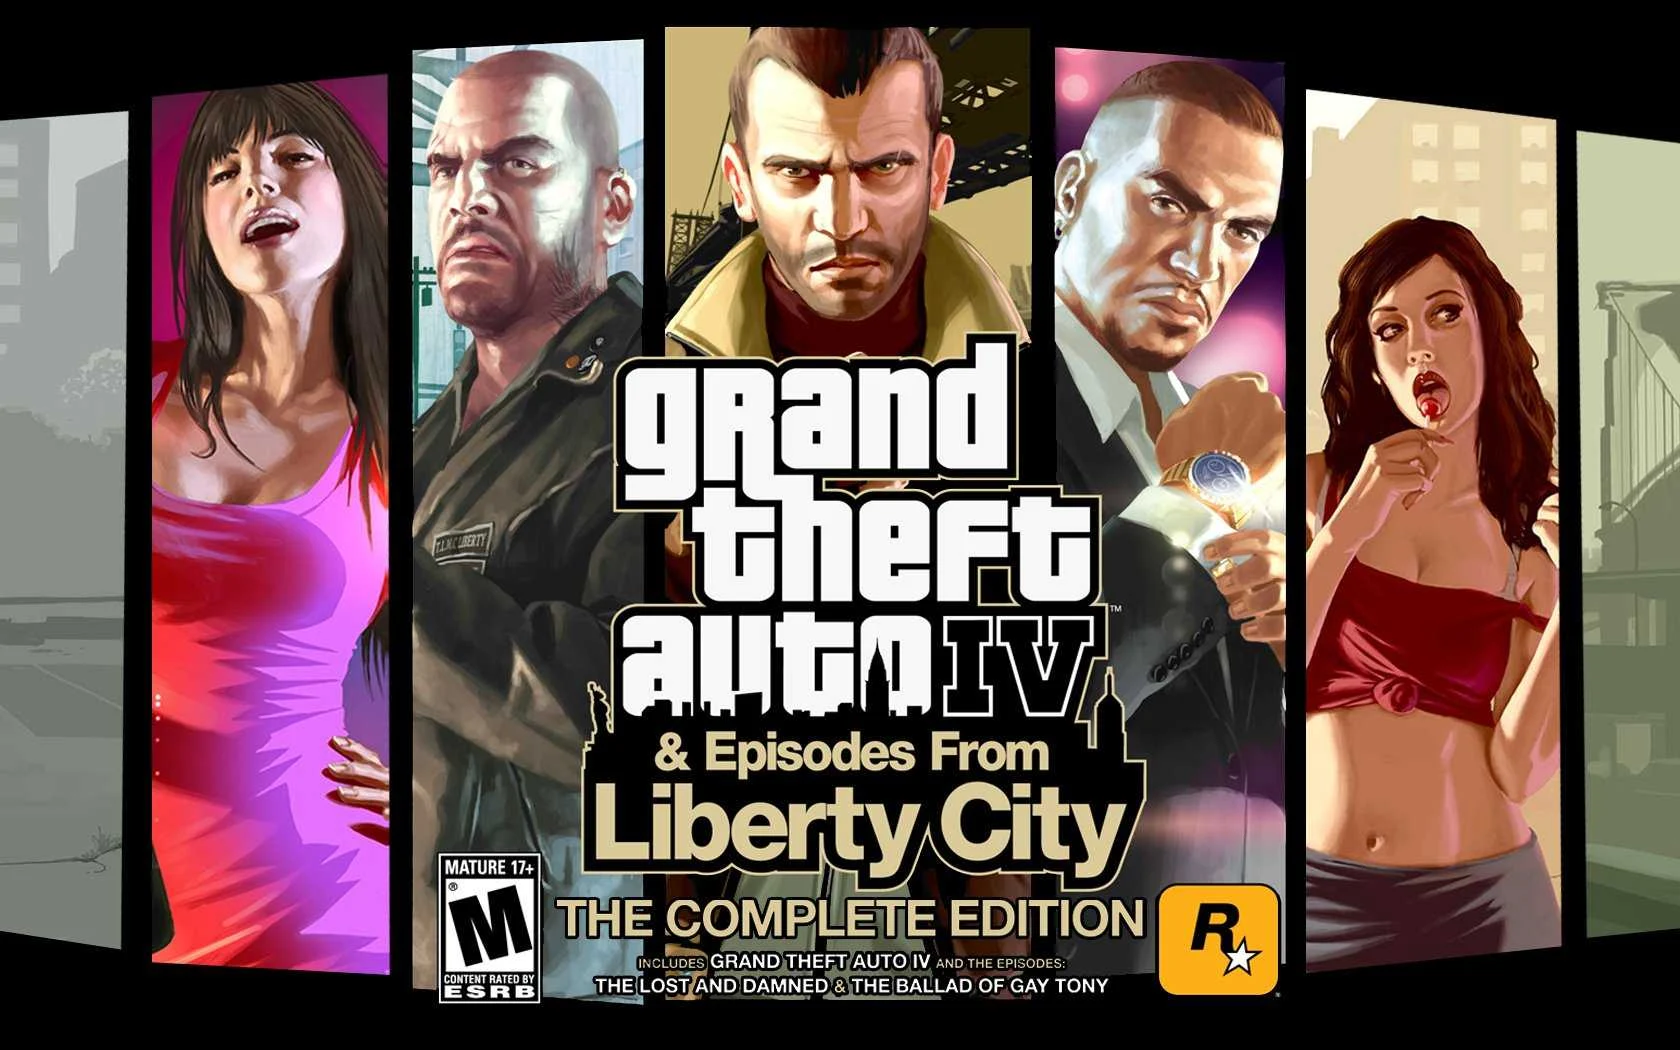 Download Grand Theft Auto IV: The Complete Edition for Windows 10